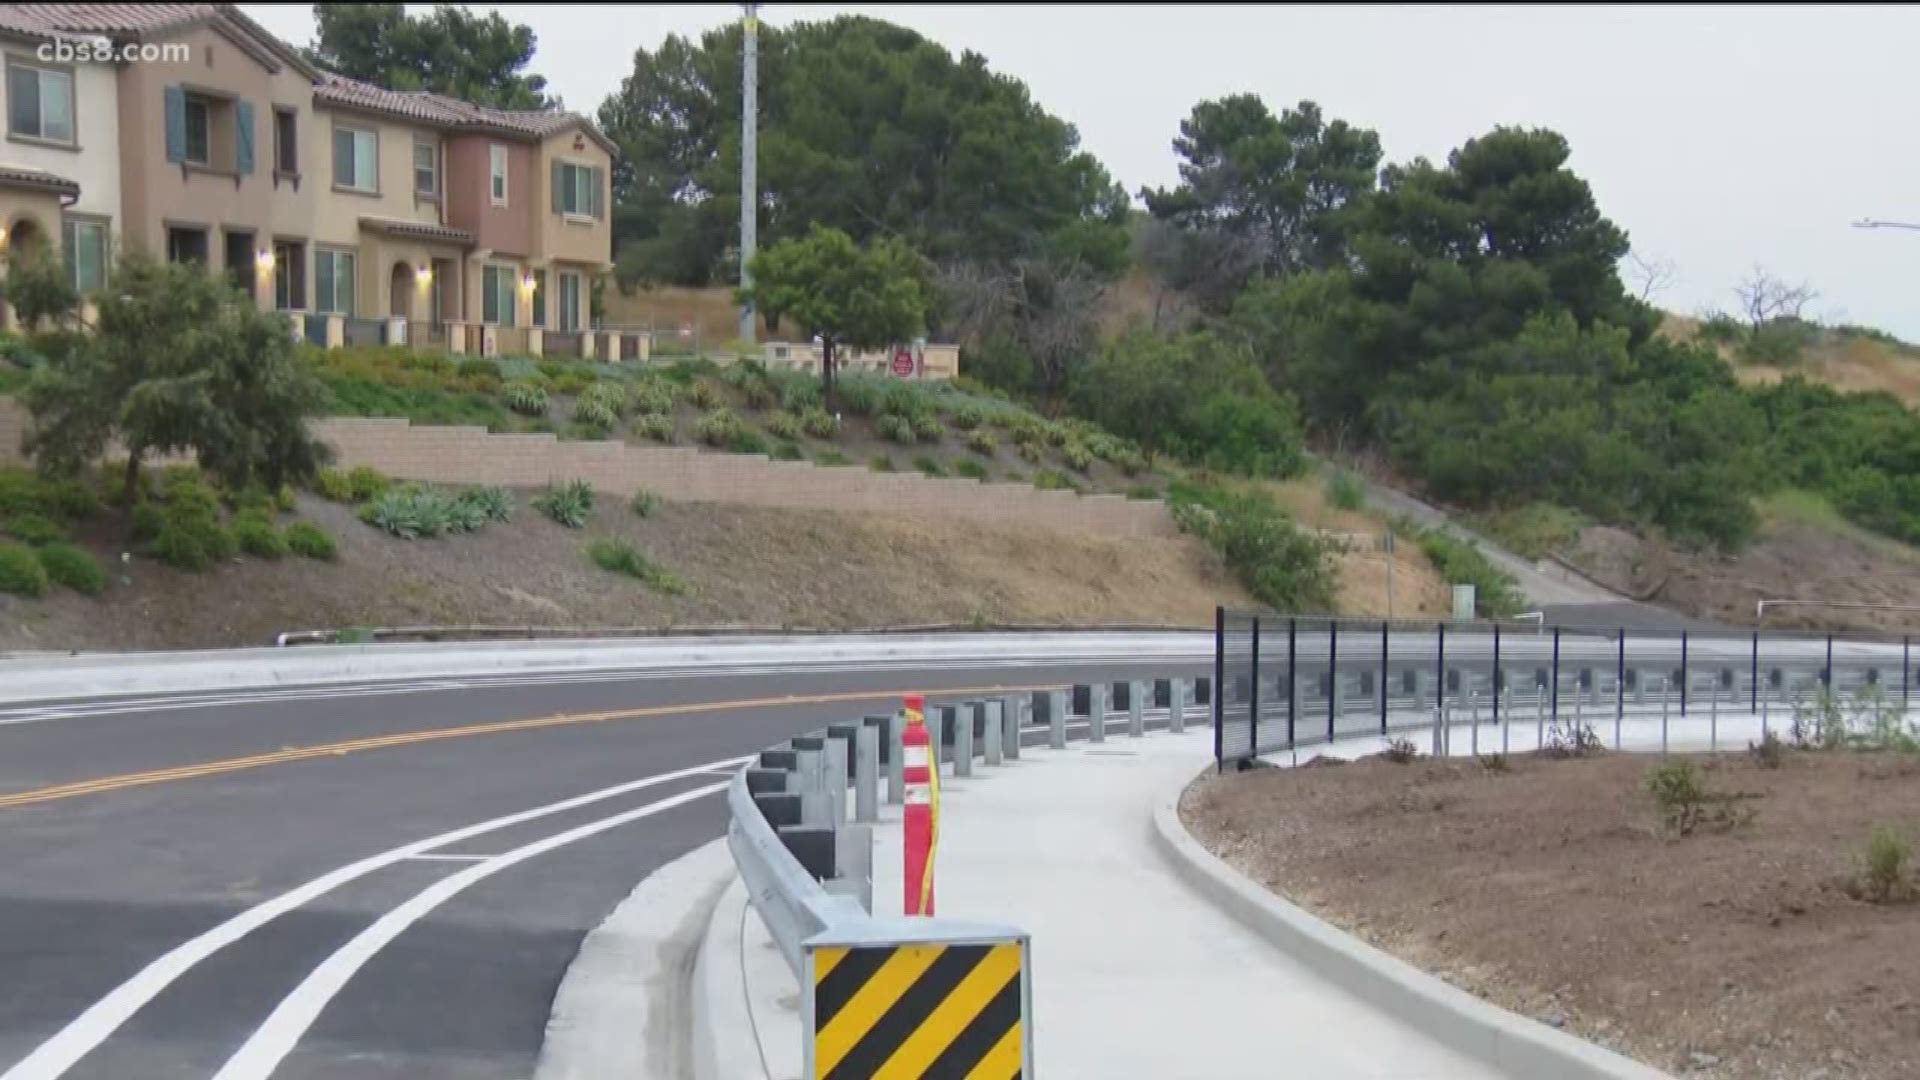 The city invested $16 million into the Old Otay Mesa Road reconstruction project to replace a half-mile dirt path primarily used by San Ysidro students walking to school.